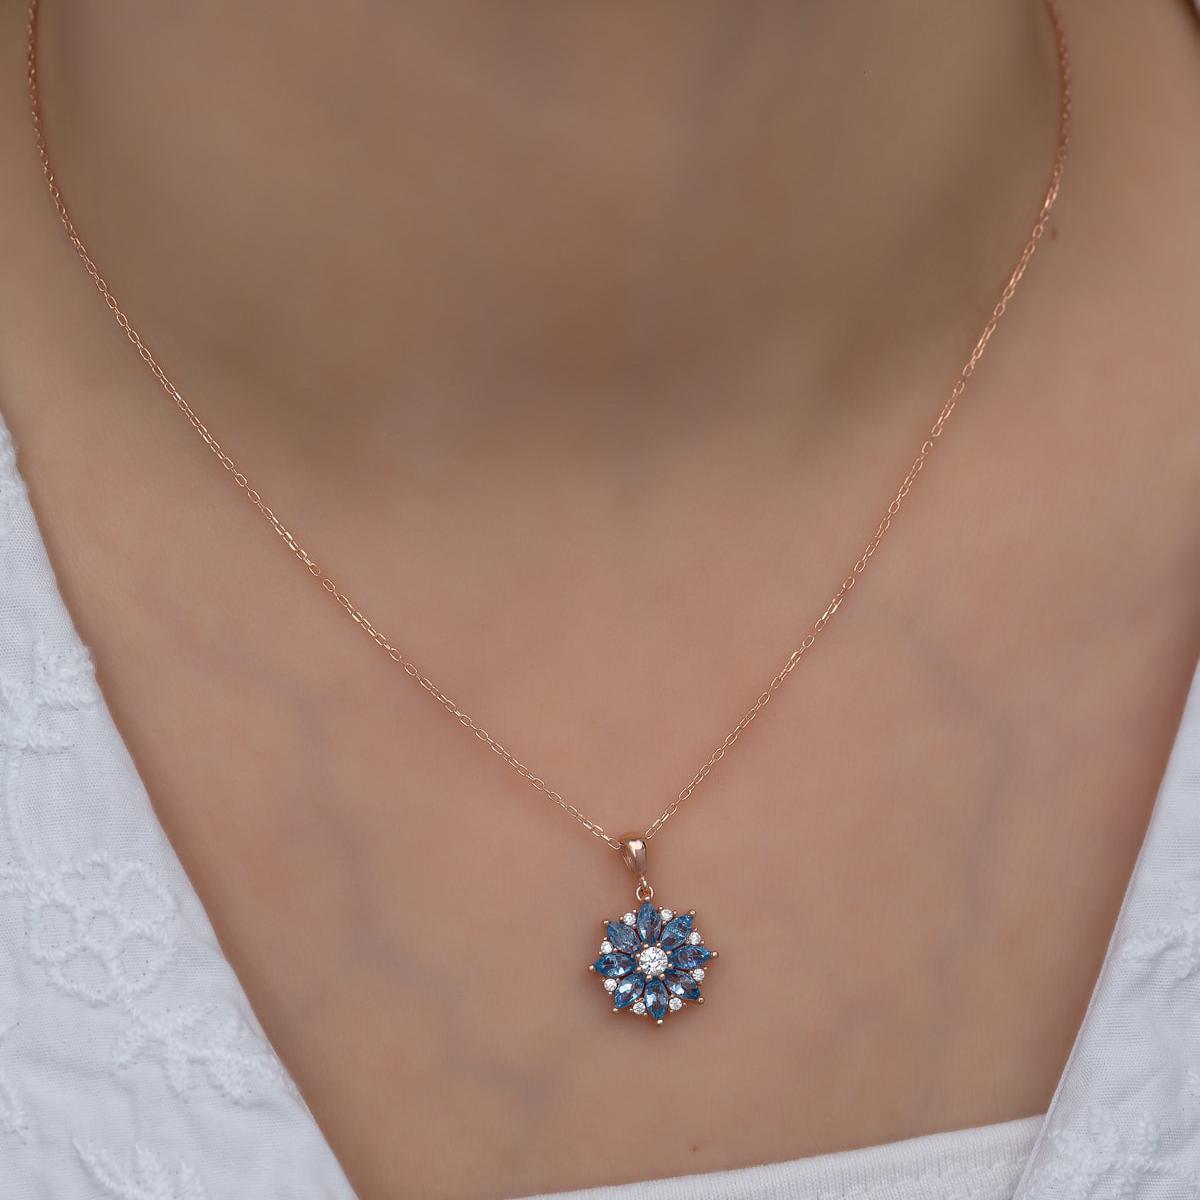 Aquamarine Lotus Necklace • Lotus Flower Necklace • Gift for Yoga Love - Trending Silver Gifts